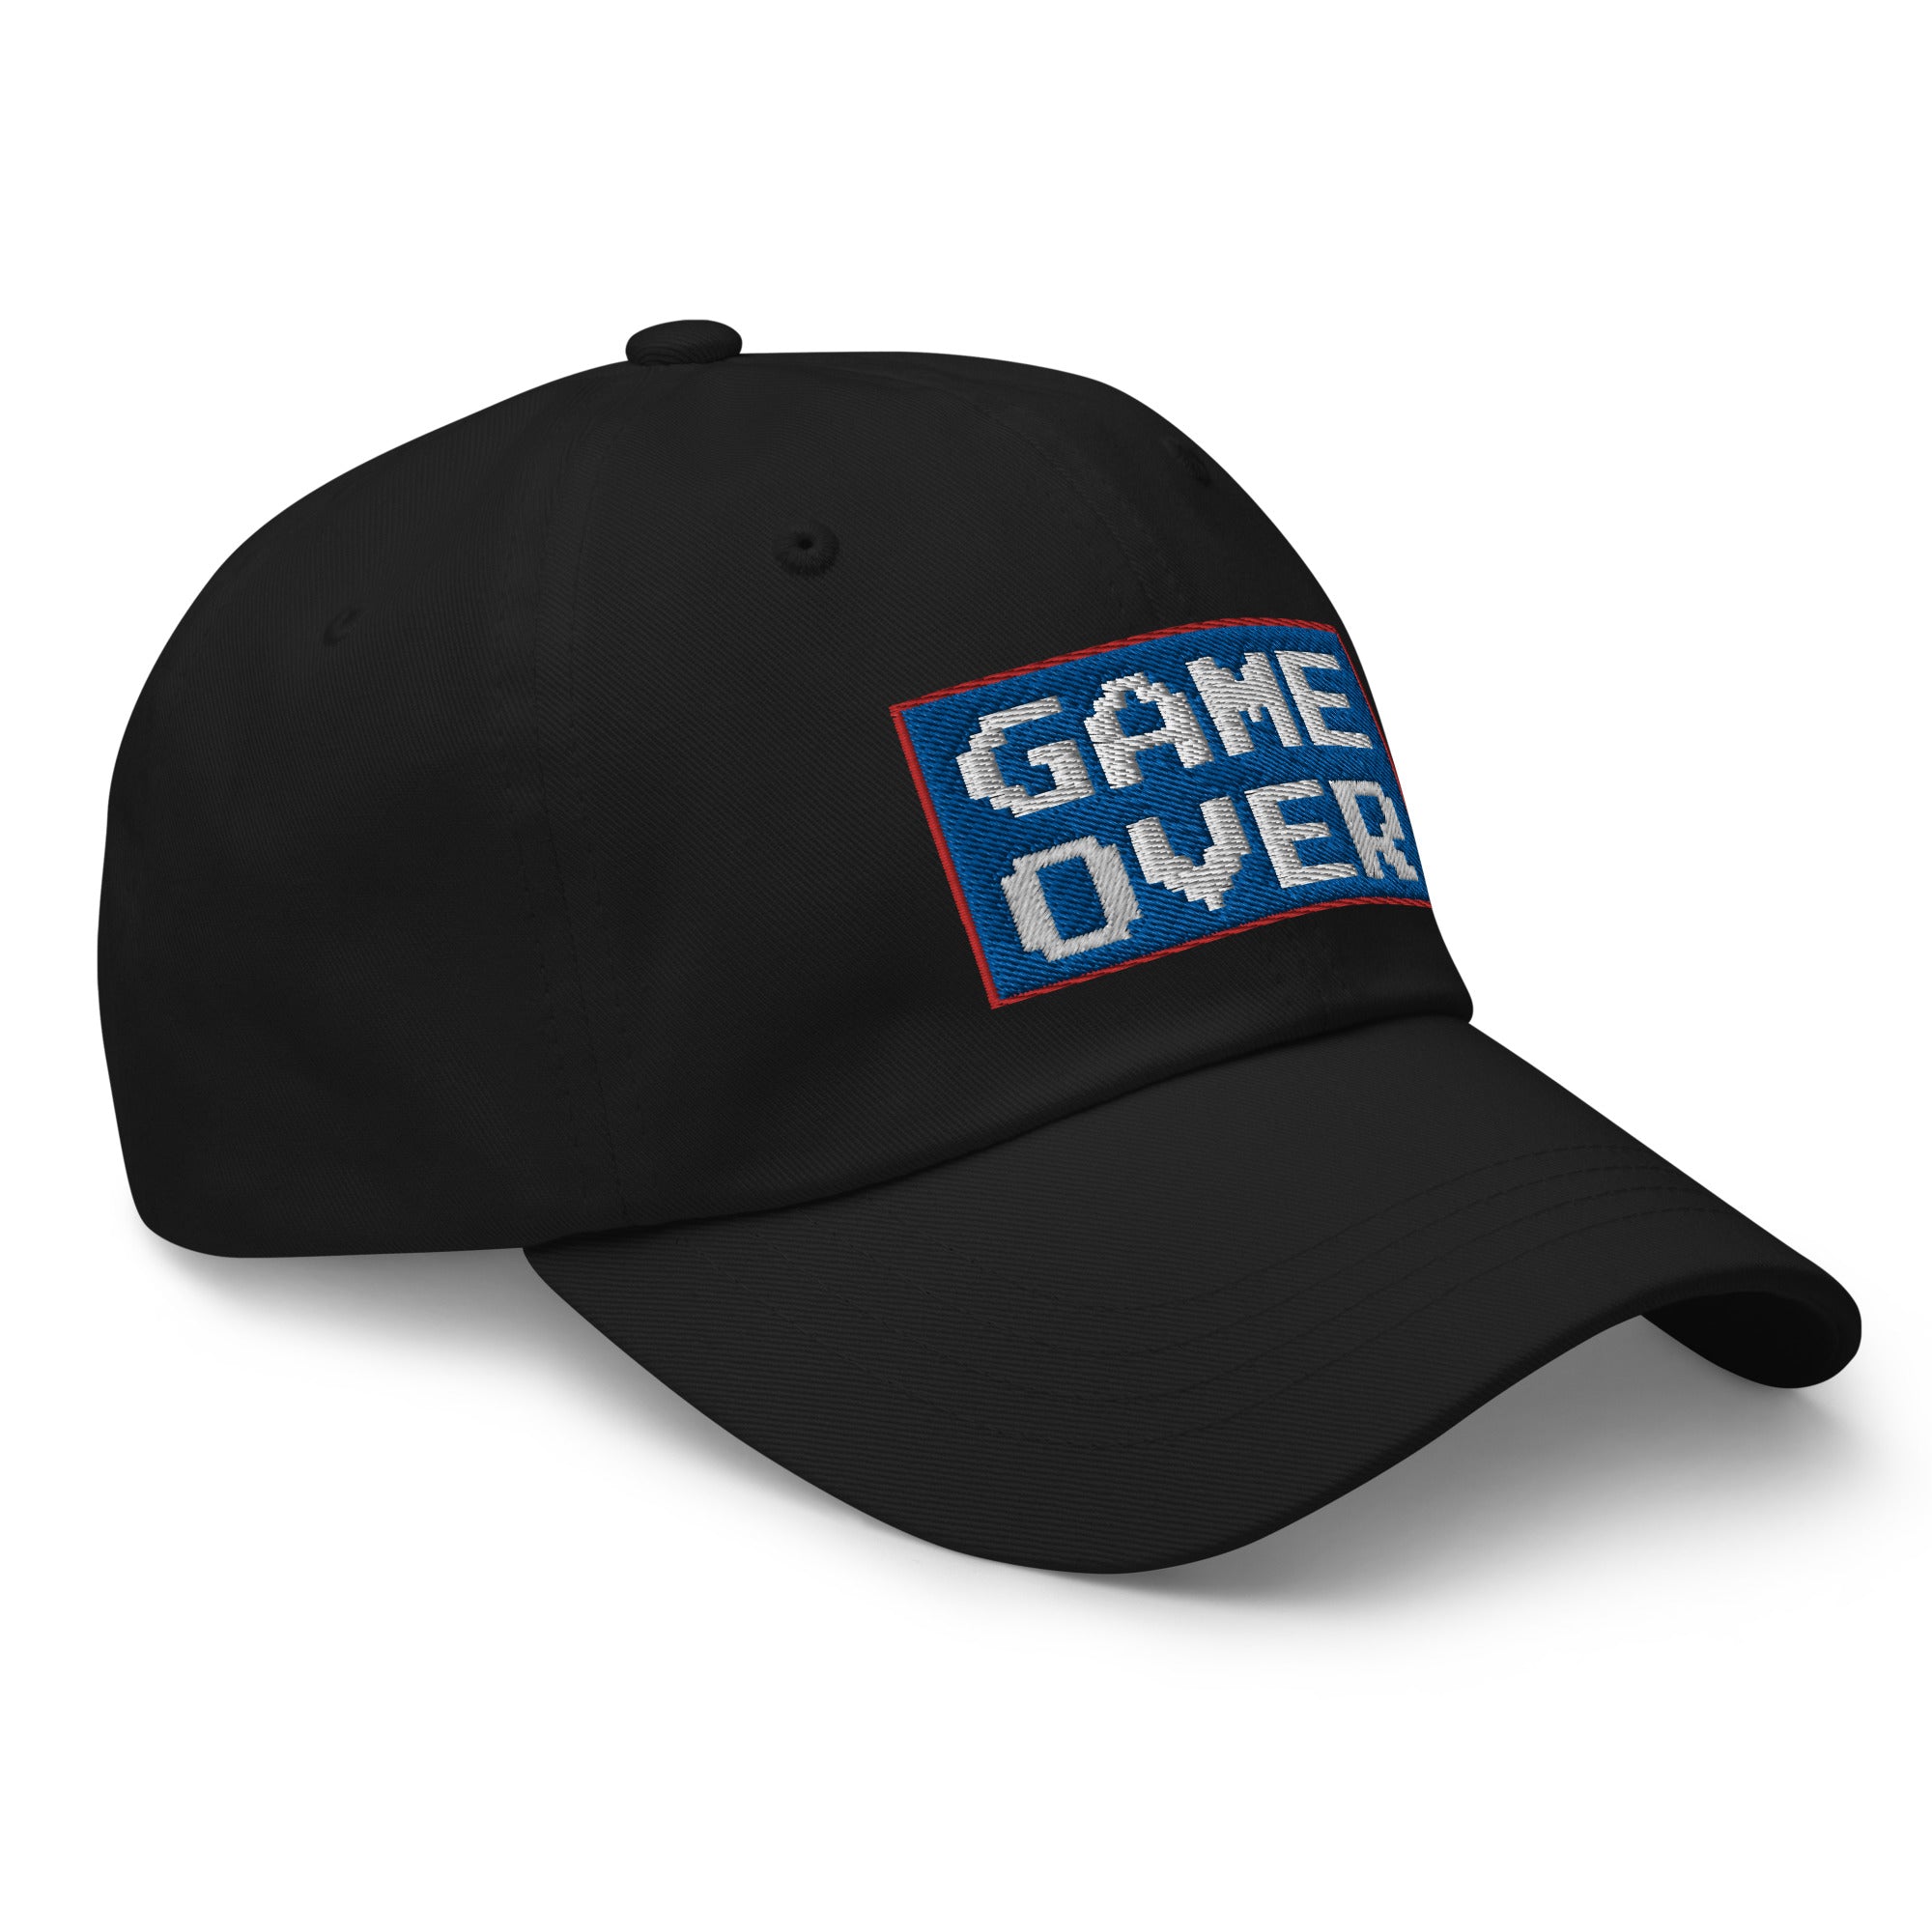 Game Over 8 Bit Embroidered Baseball Cap 80's Classic Gaming Style Dad hat - Edge of Life Designs